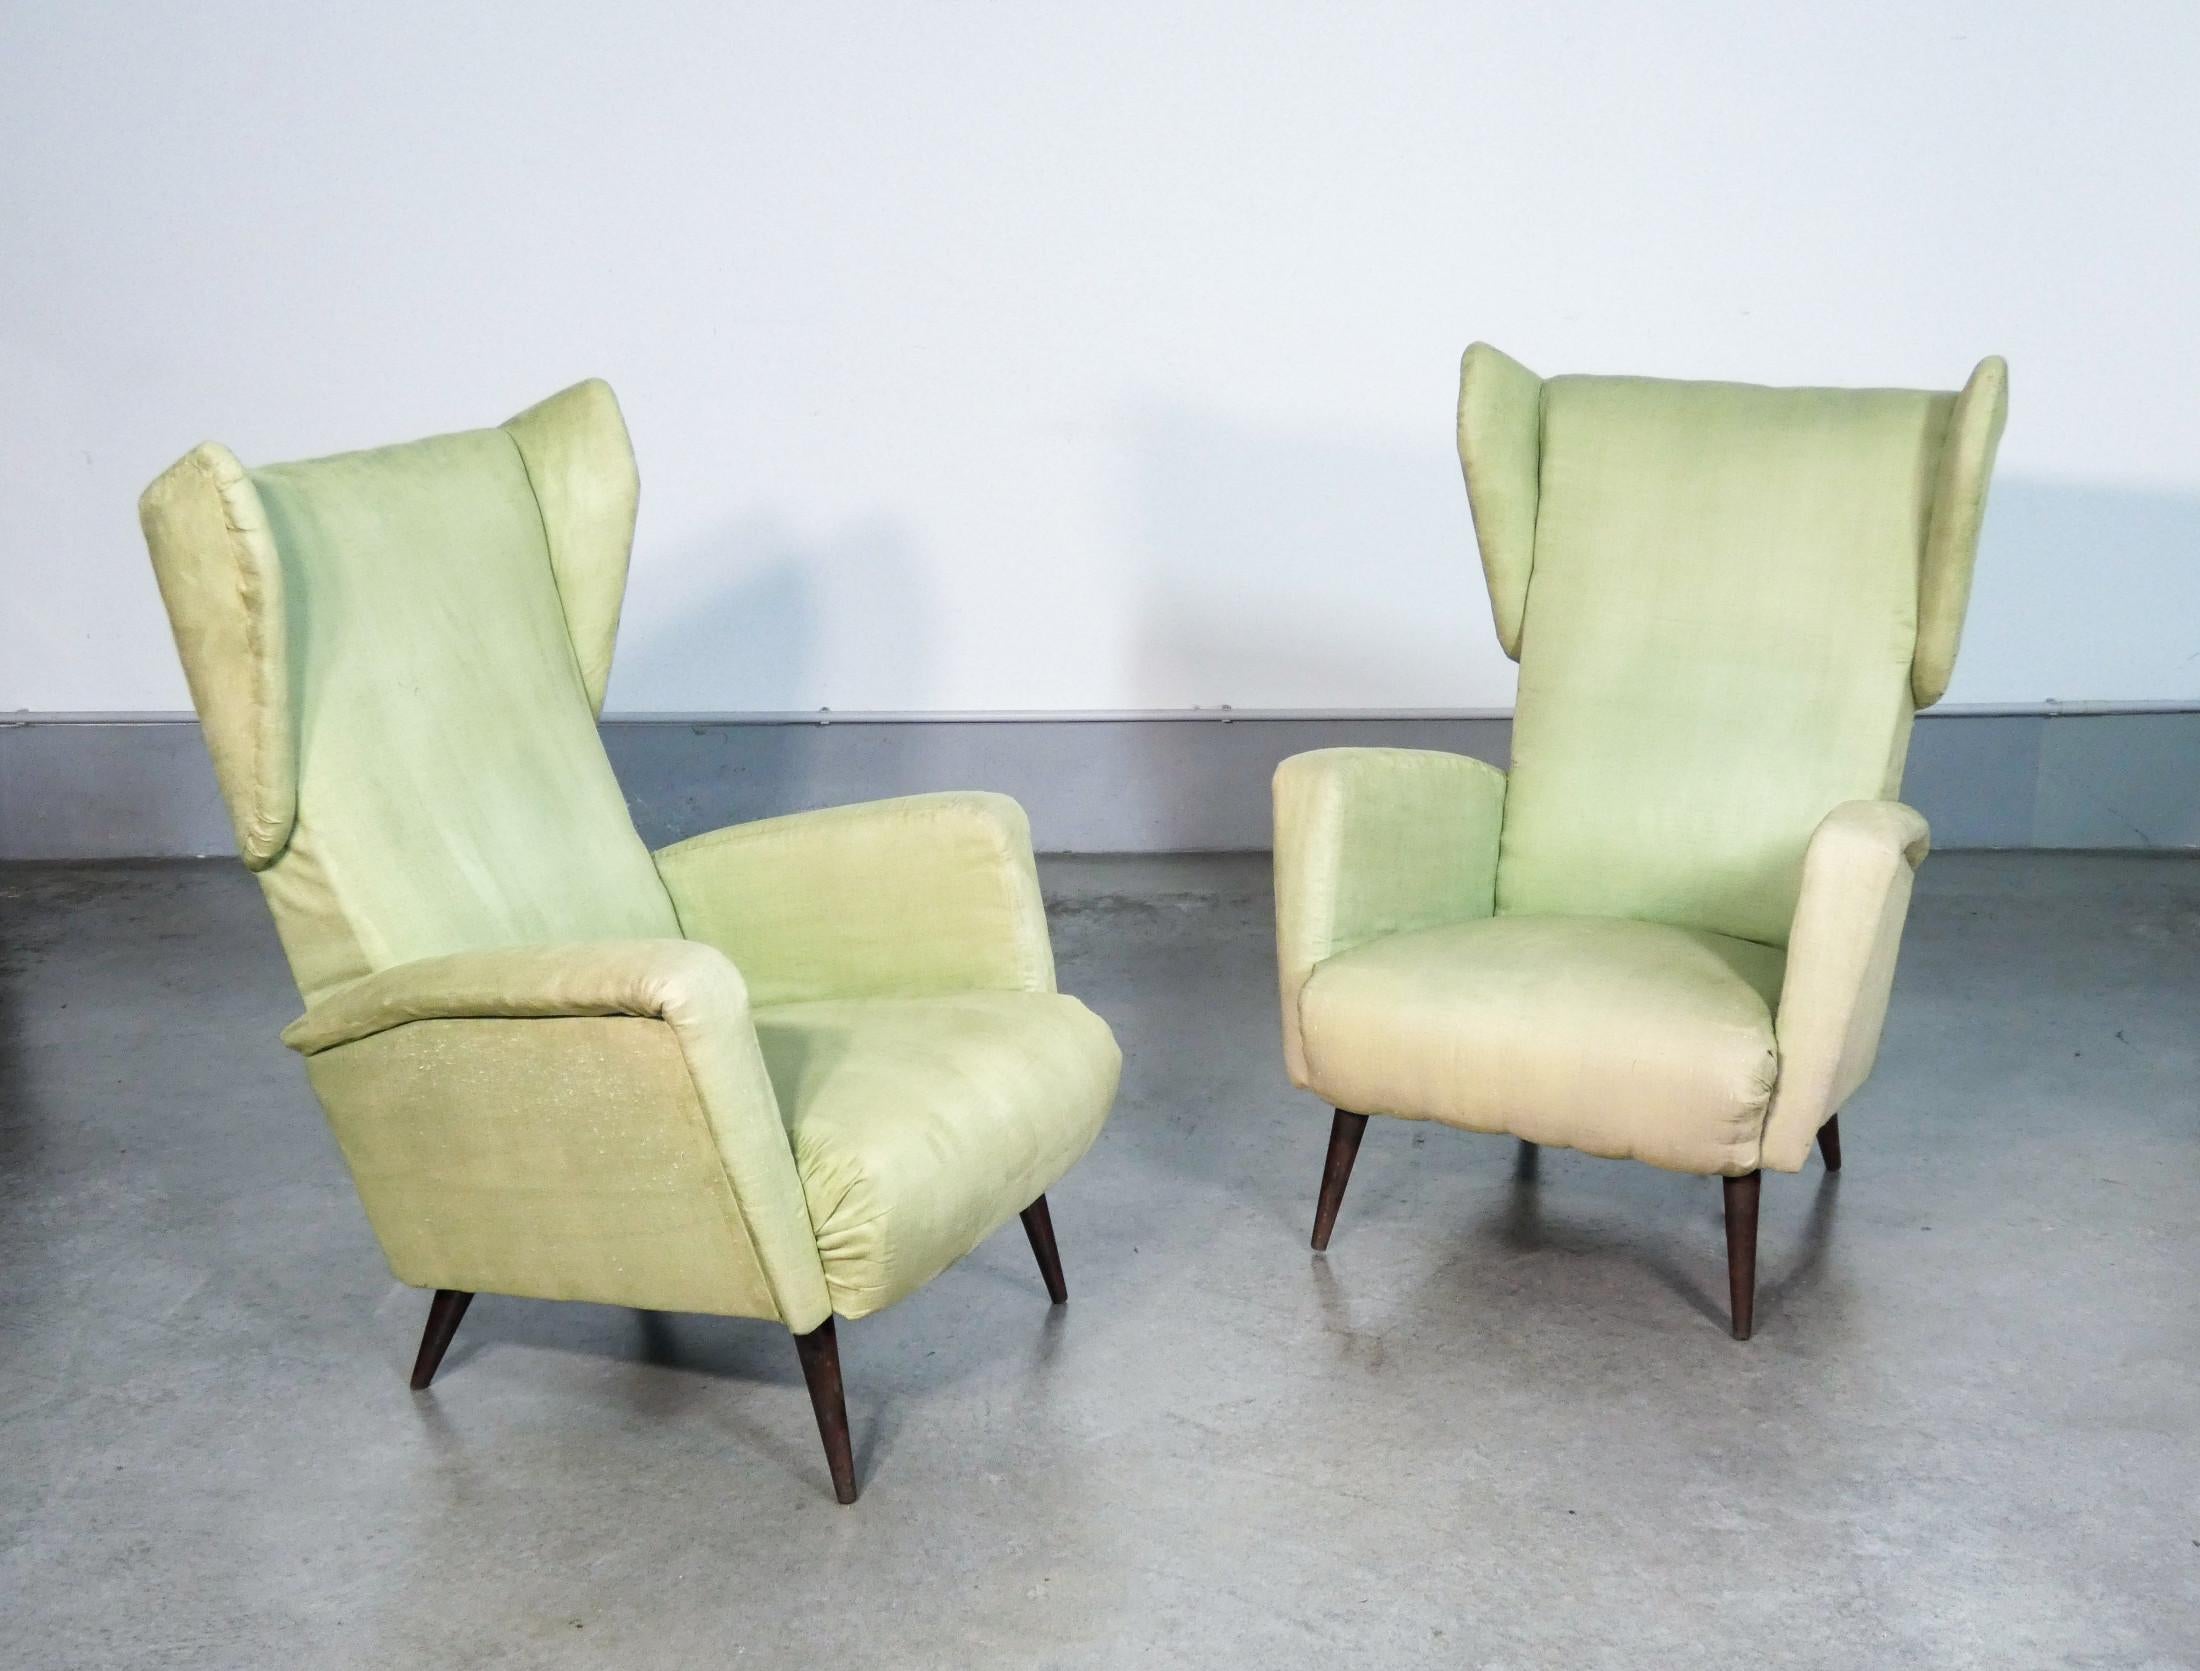 Pair of armchairs,
Design Giò Ponti for CASSINA.
Model famous for being used in the preparation of the rooms of the Royal Hotel in Naples.

Origin
Italy

Period
1950s

Designer
Giò PONTI

Brand
CASSINA

Model
A modern reworking of